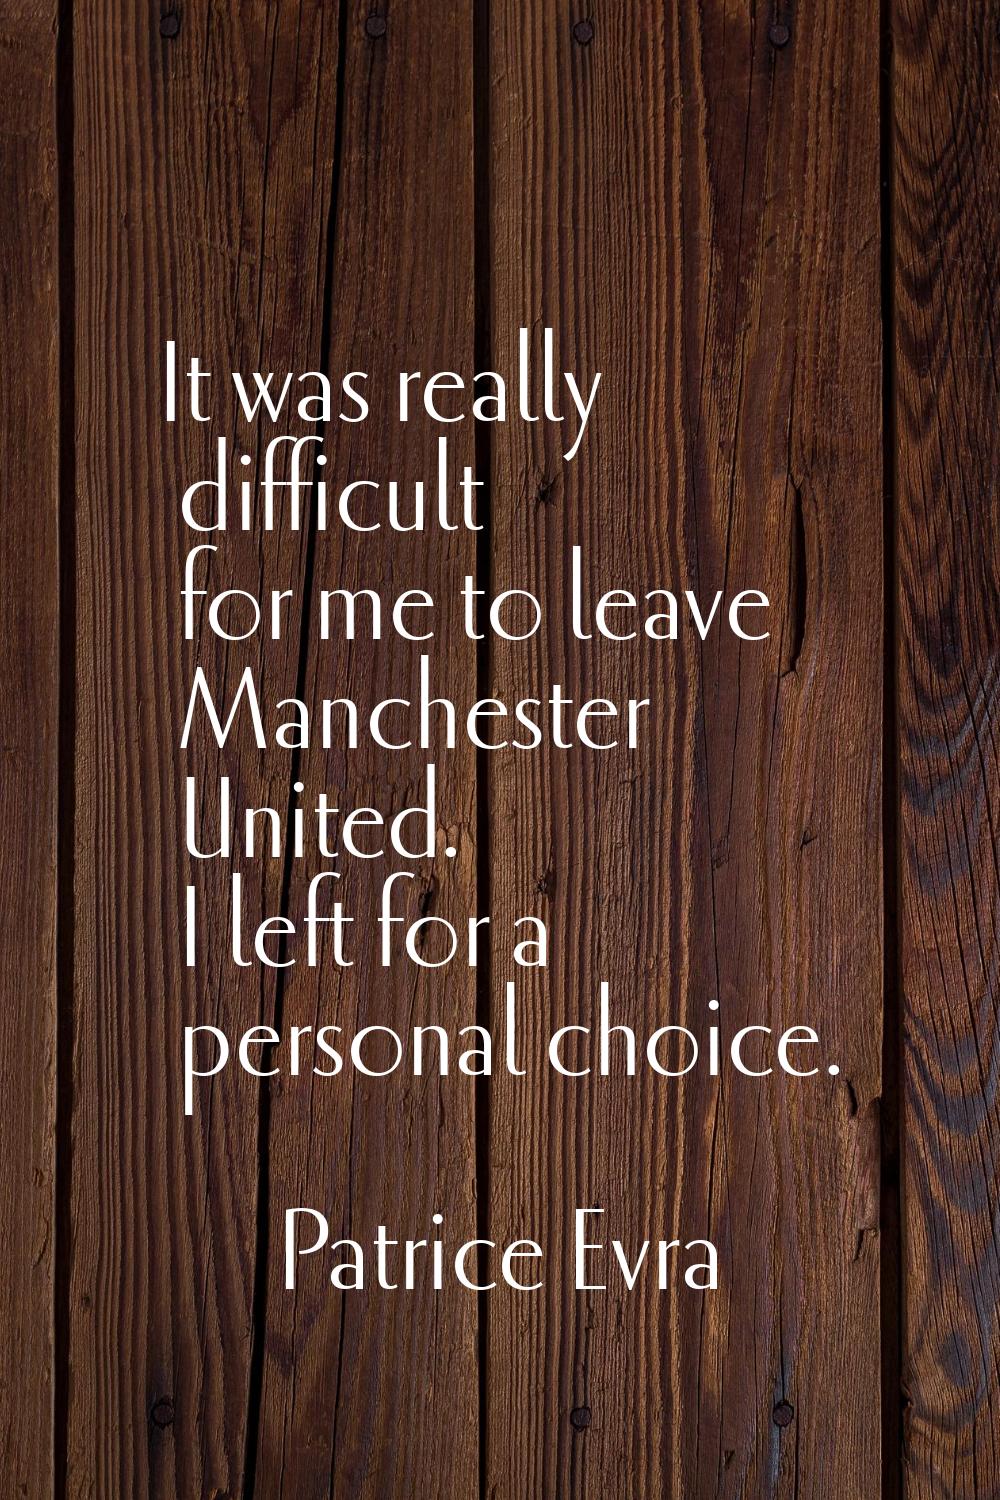 It was really difficult for me to leave Manchester United. I left for a personal choice.